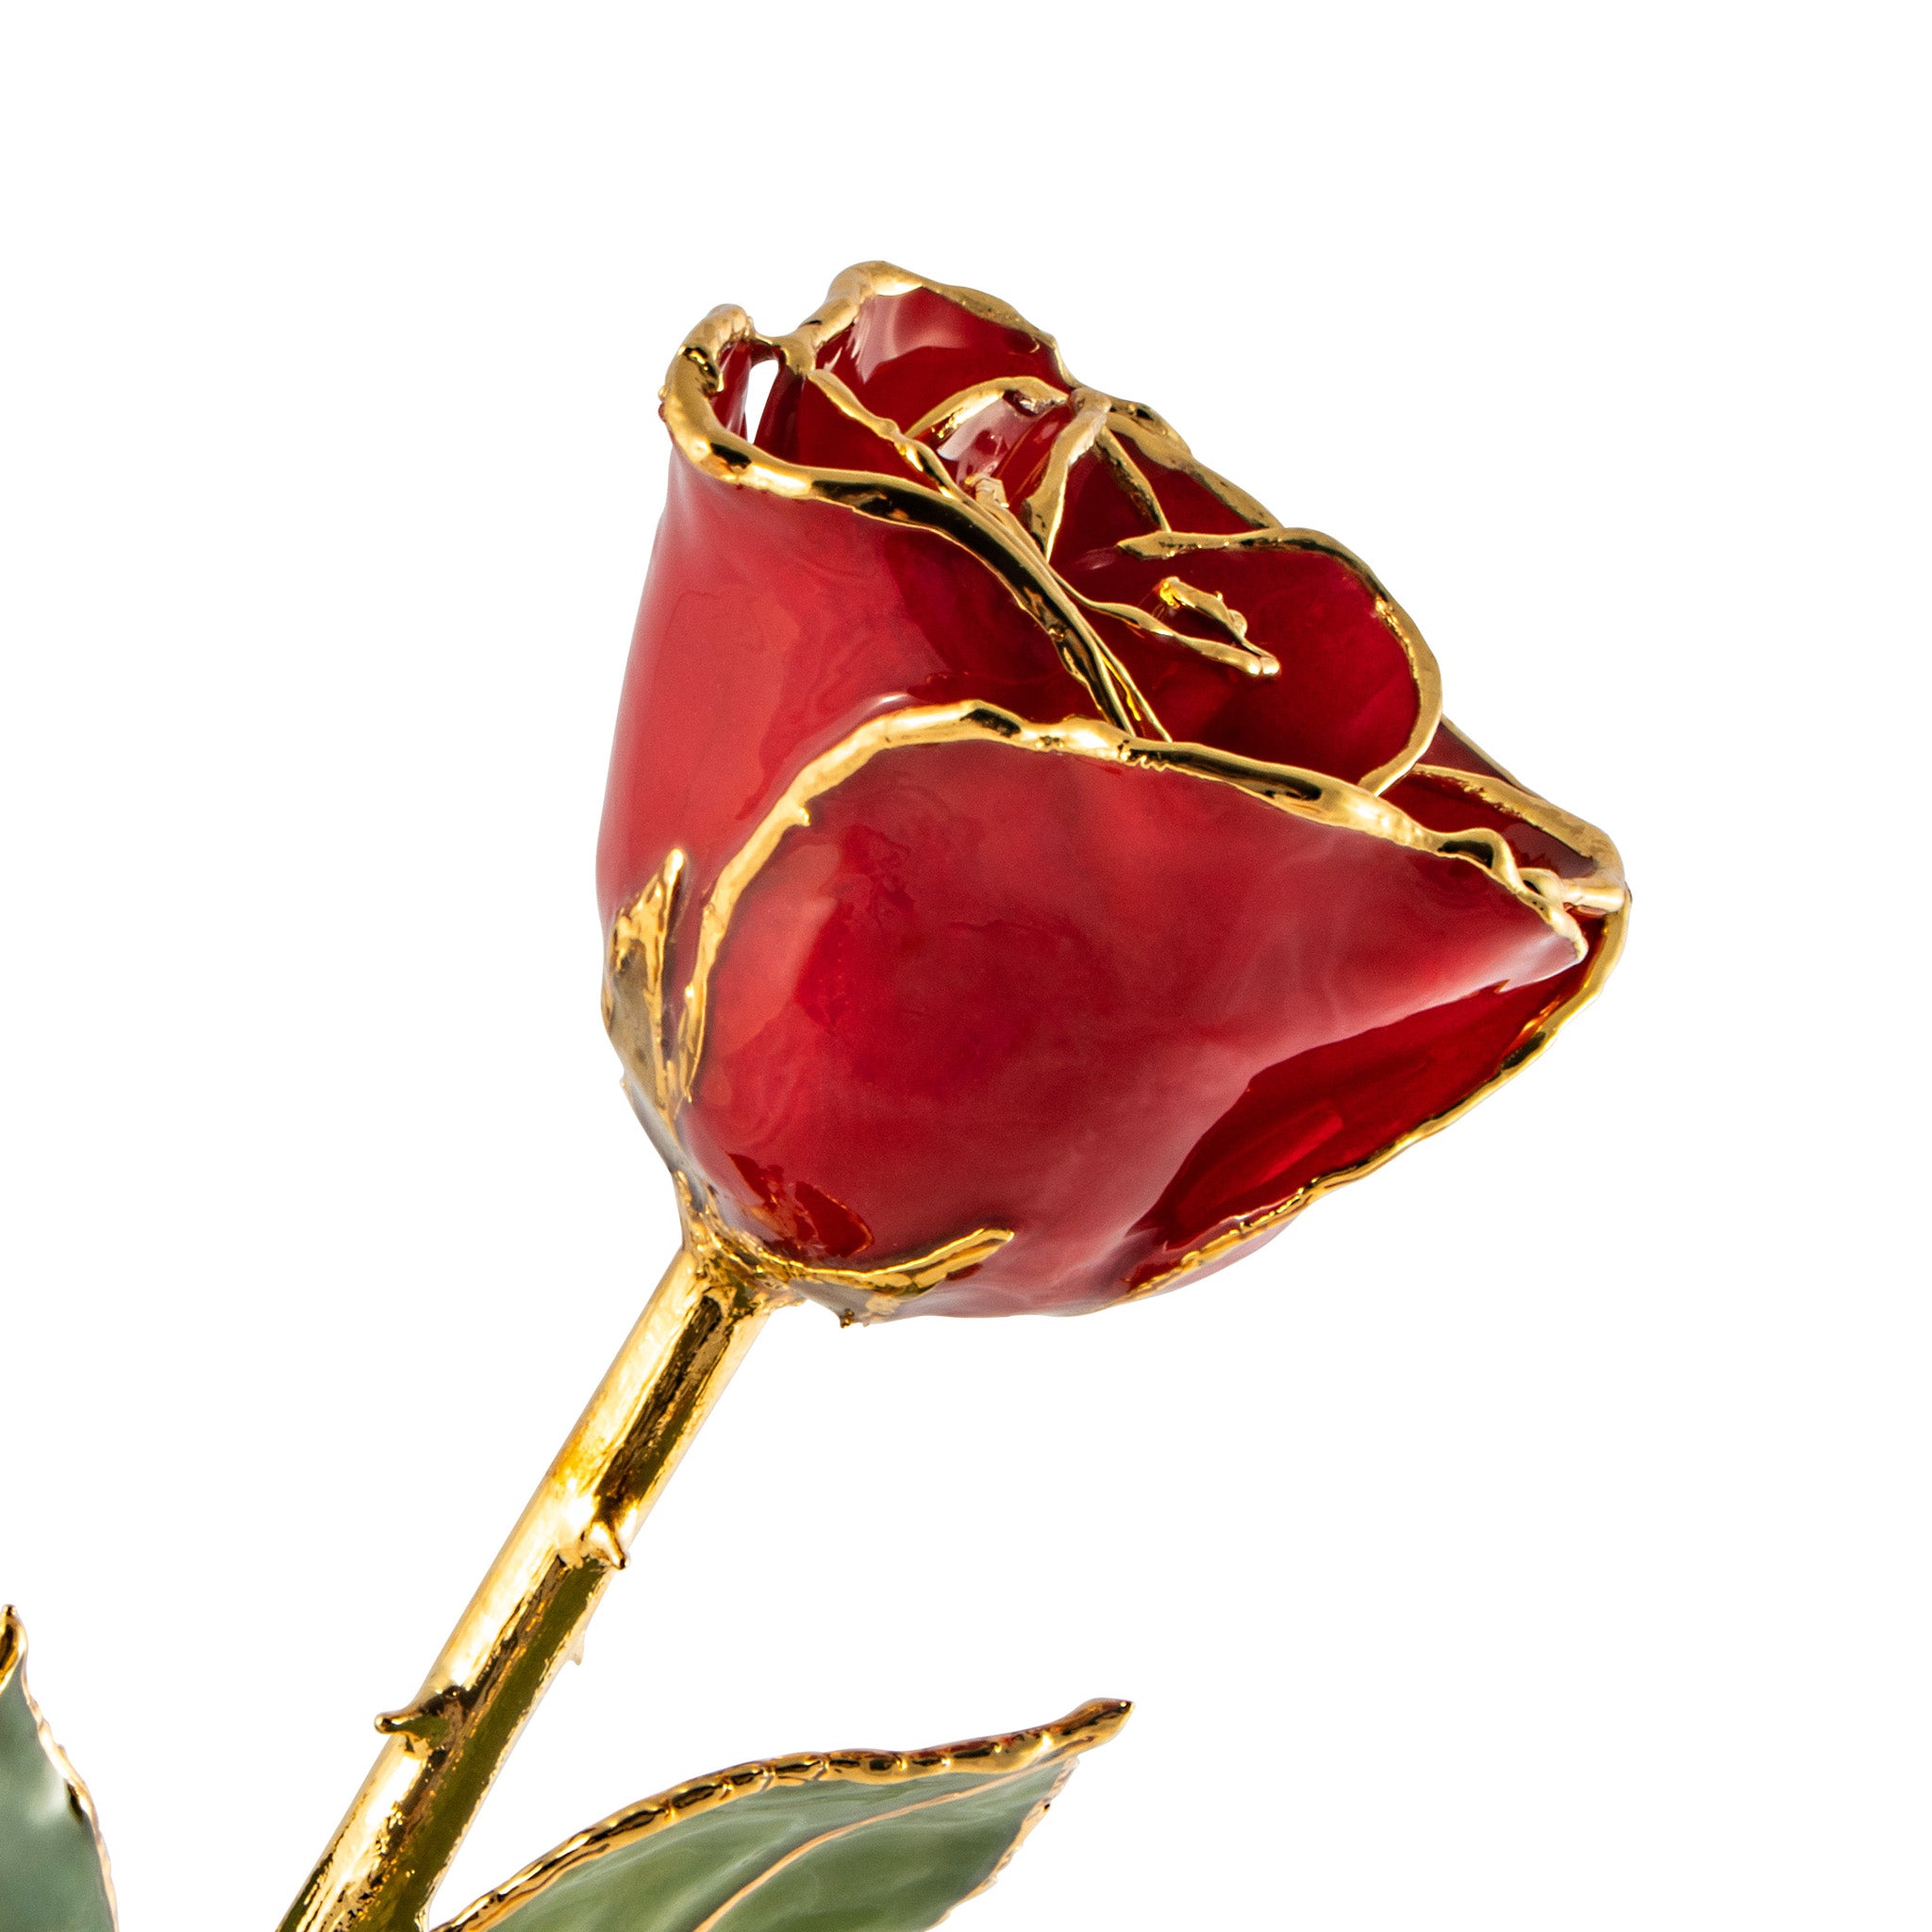 24K Gold Trimmed Forever Rose with Red Petals. View of Stem, Leaves, and Rose Petals and Showing Detail of Gold Trim